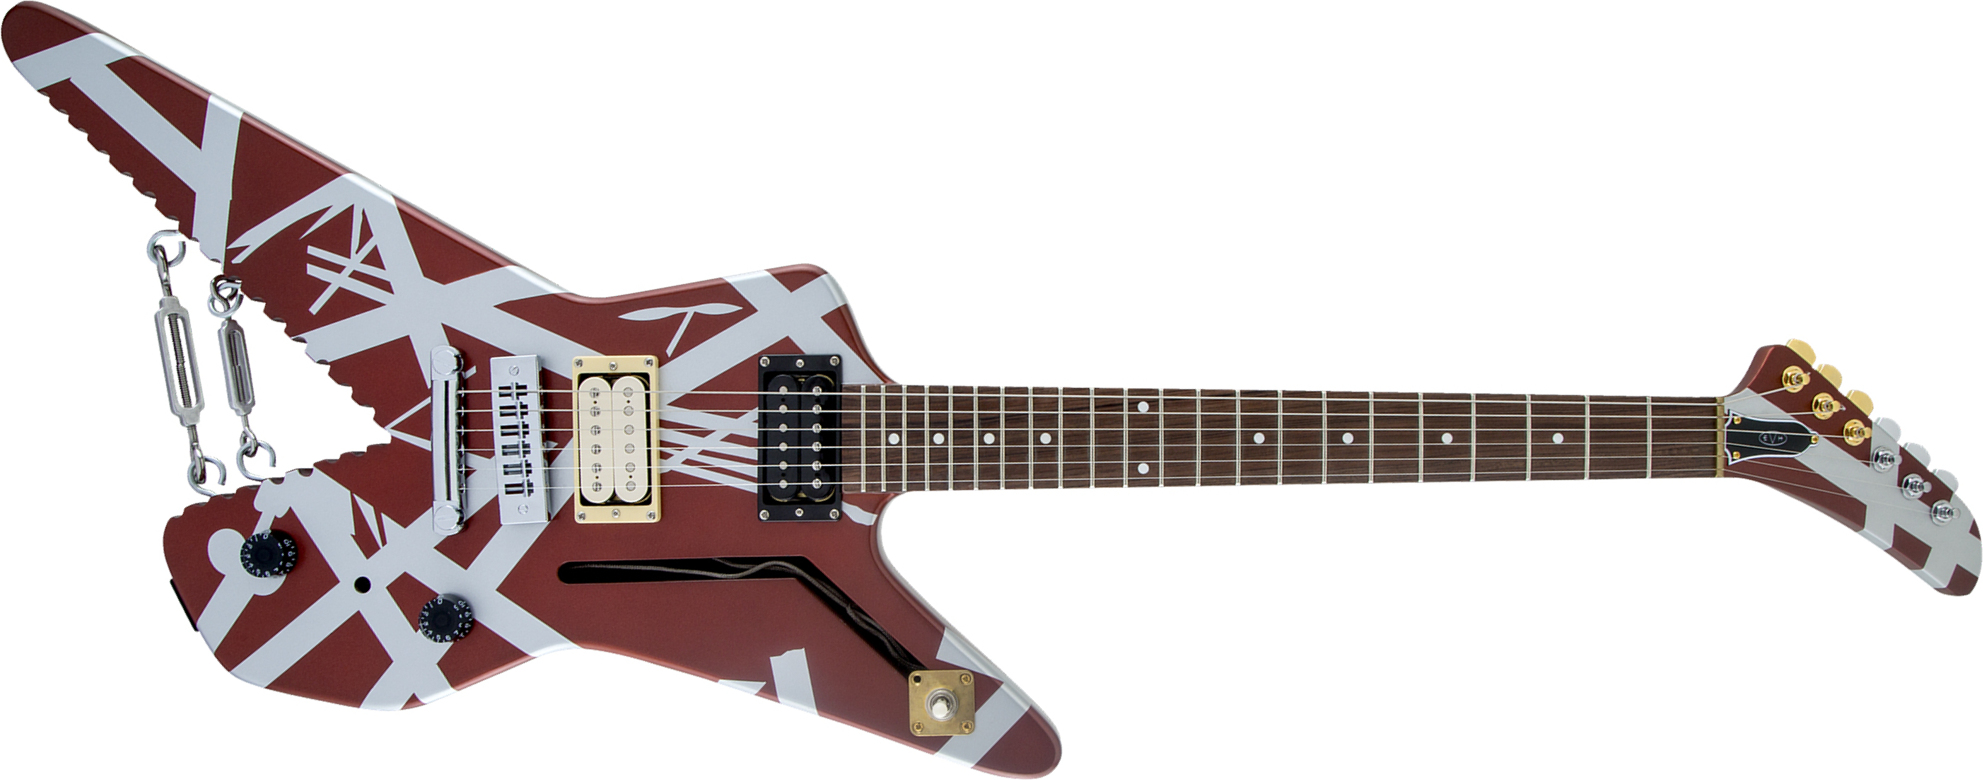 Evh Striped Series Shark Hh Ht Pf - Burgundy With Silver Stripes - E-Gitarre aus Metall - Main picture